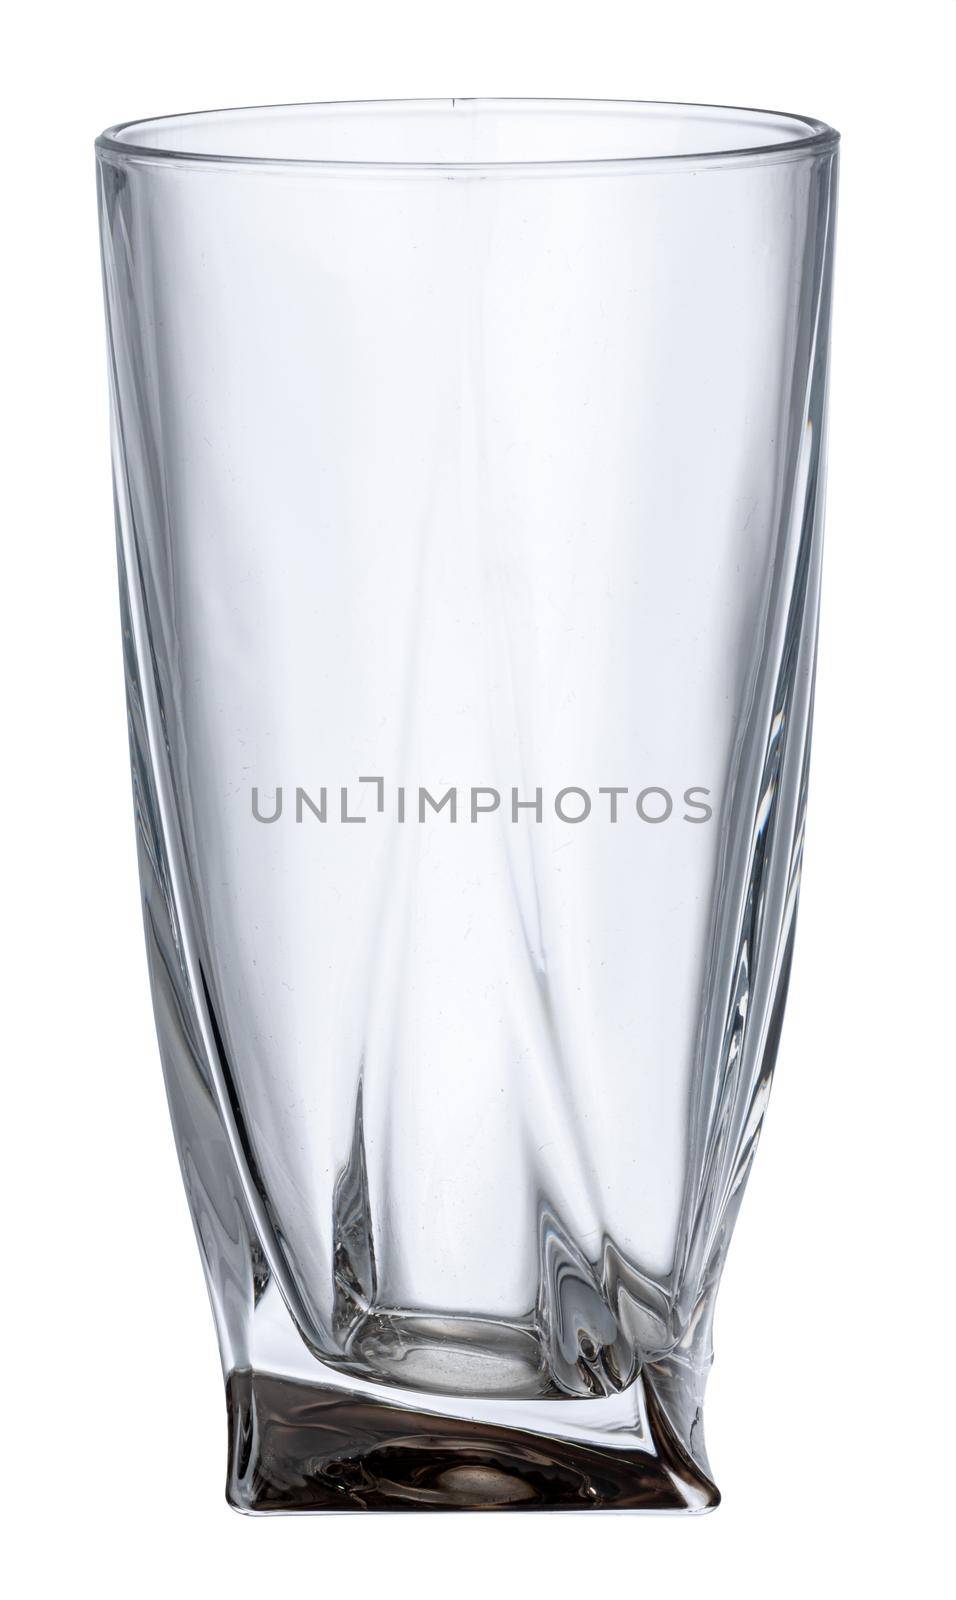 New empty glass isolated on white background by Fabrikasimf